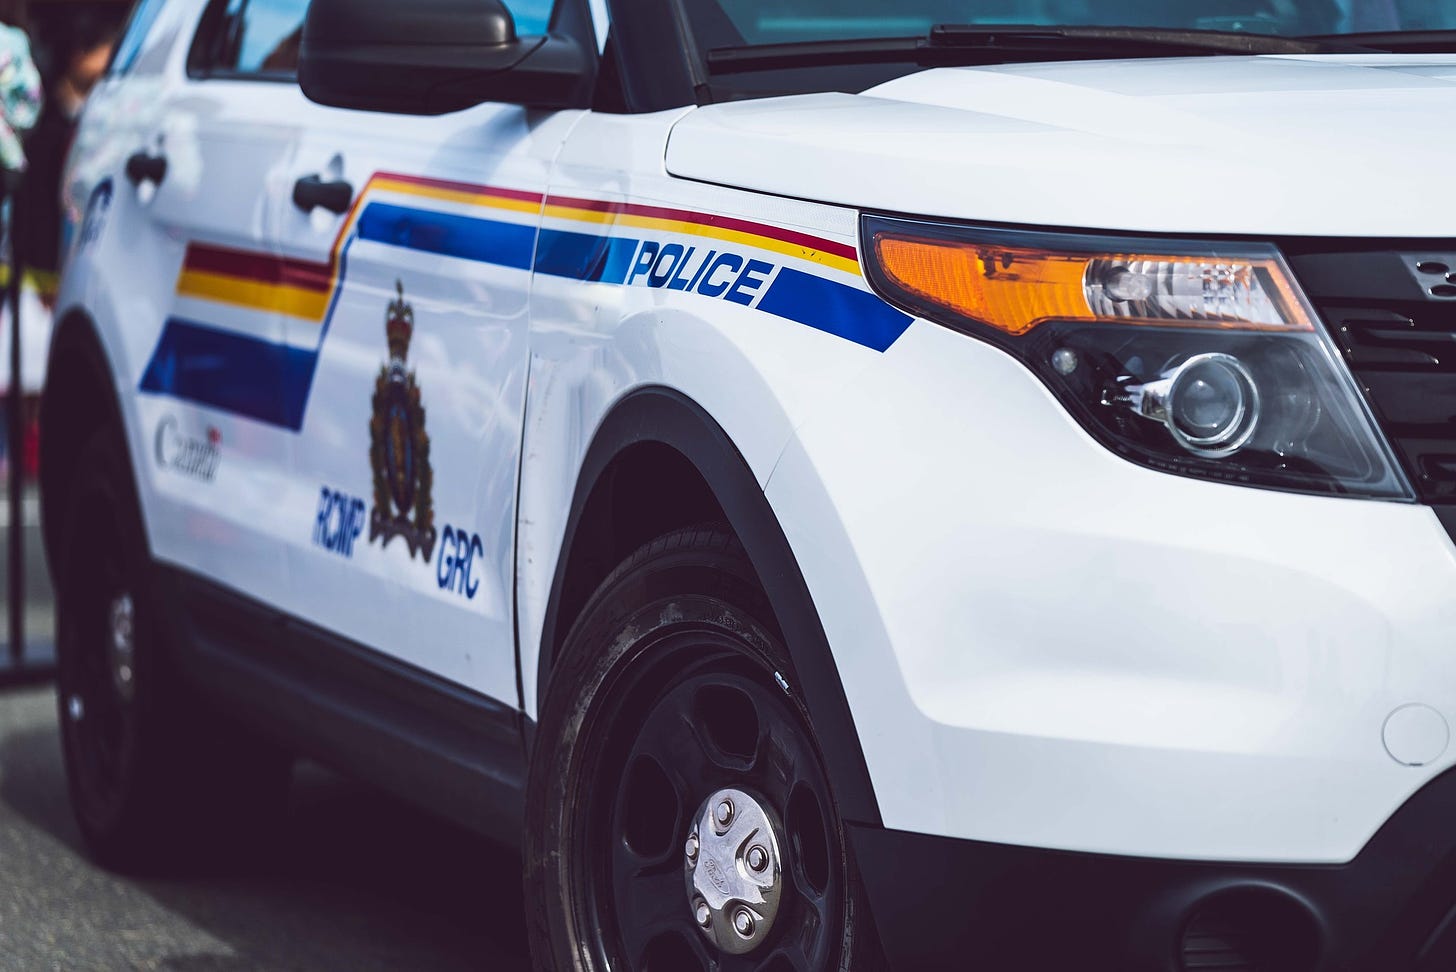 A stock photo of an RCMP vehicle.